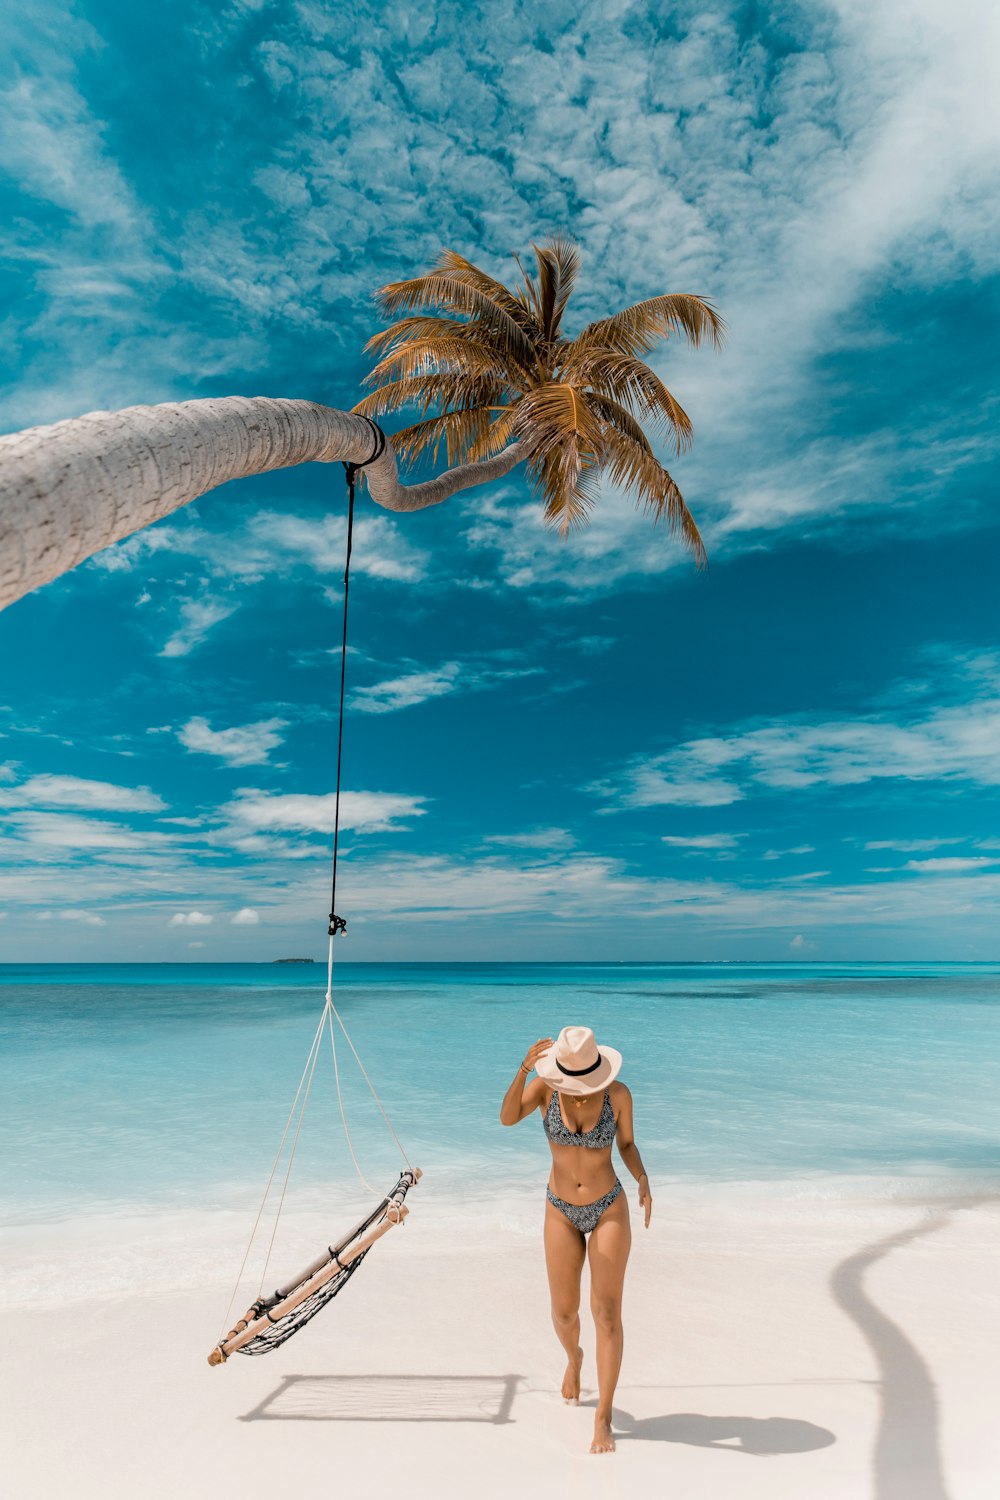 a person standing on a beach with a palm tree and a boat